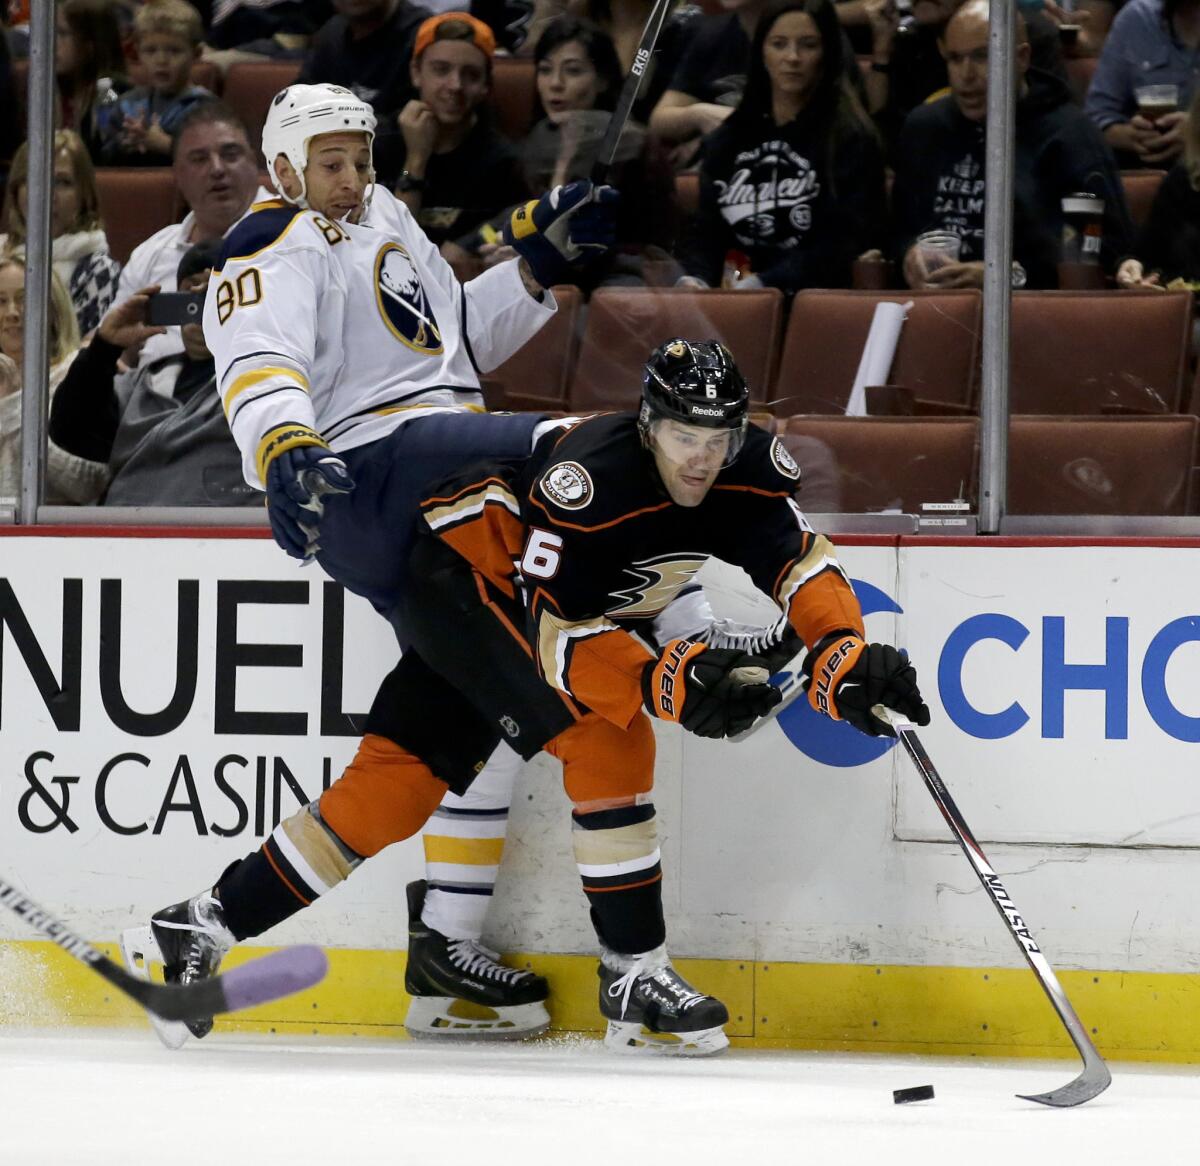 Forward Chris Stewart (30) played for the Buffalo Sabres last season. Stewart has signed with the Ducks.